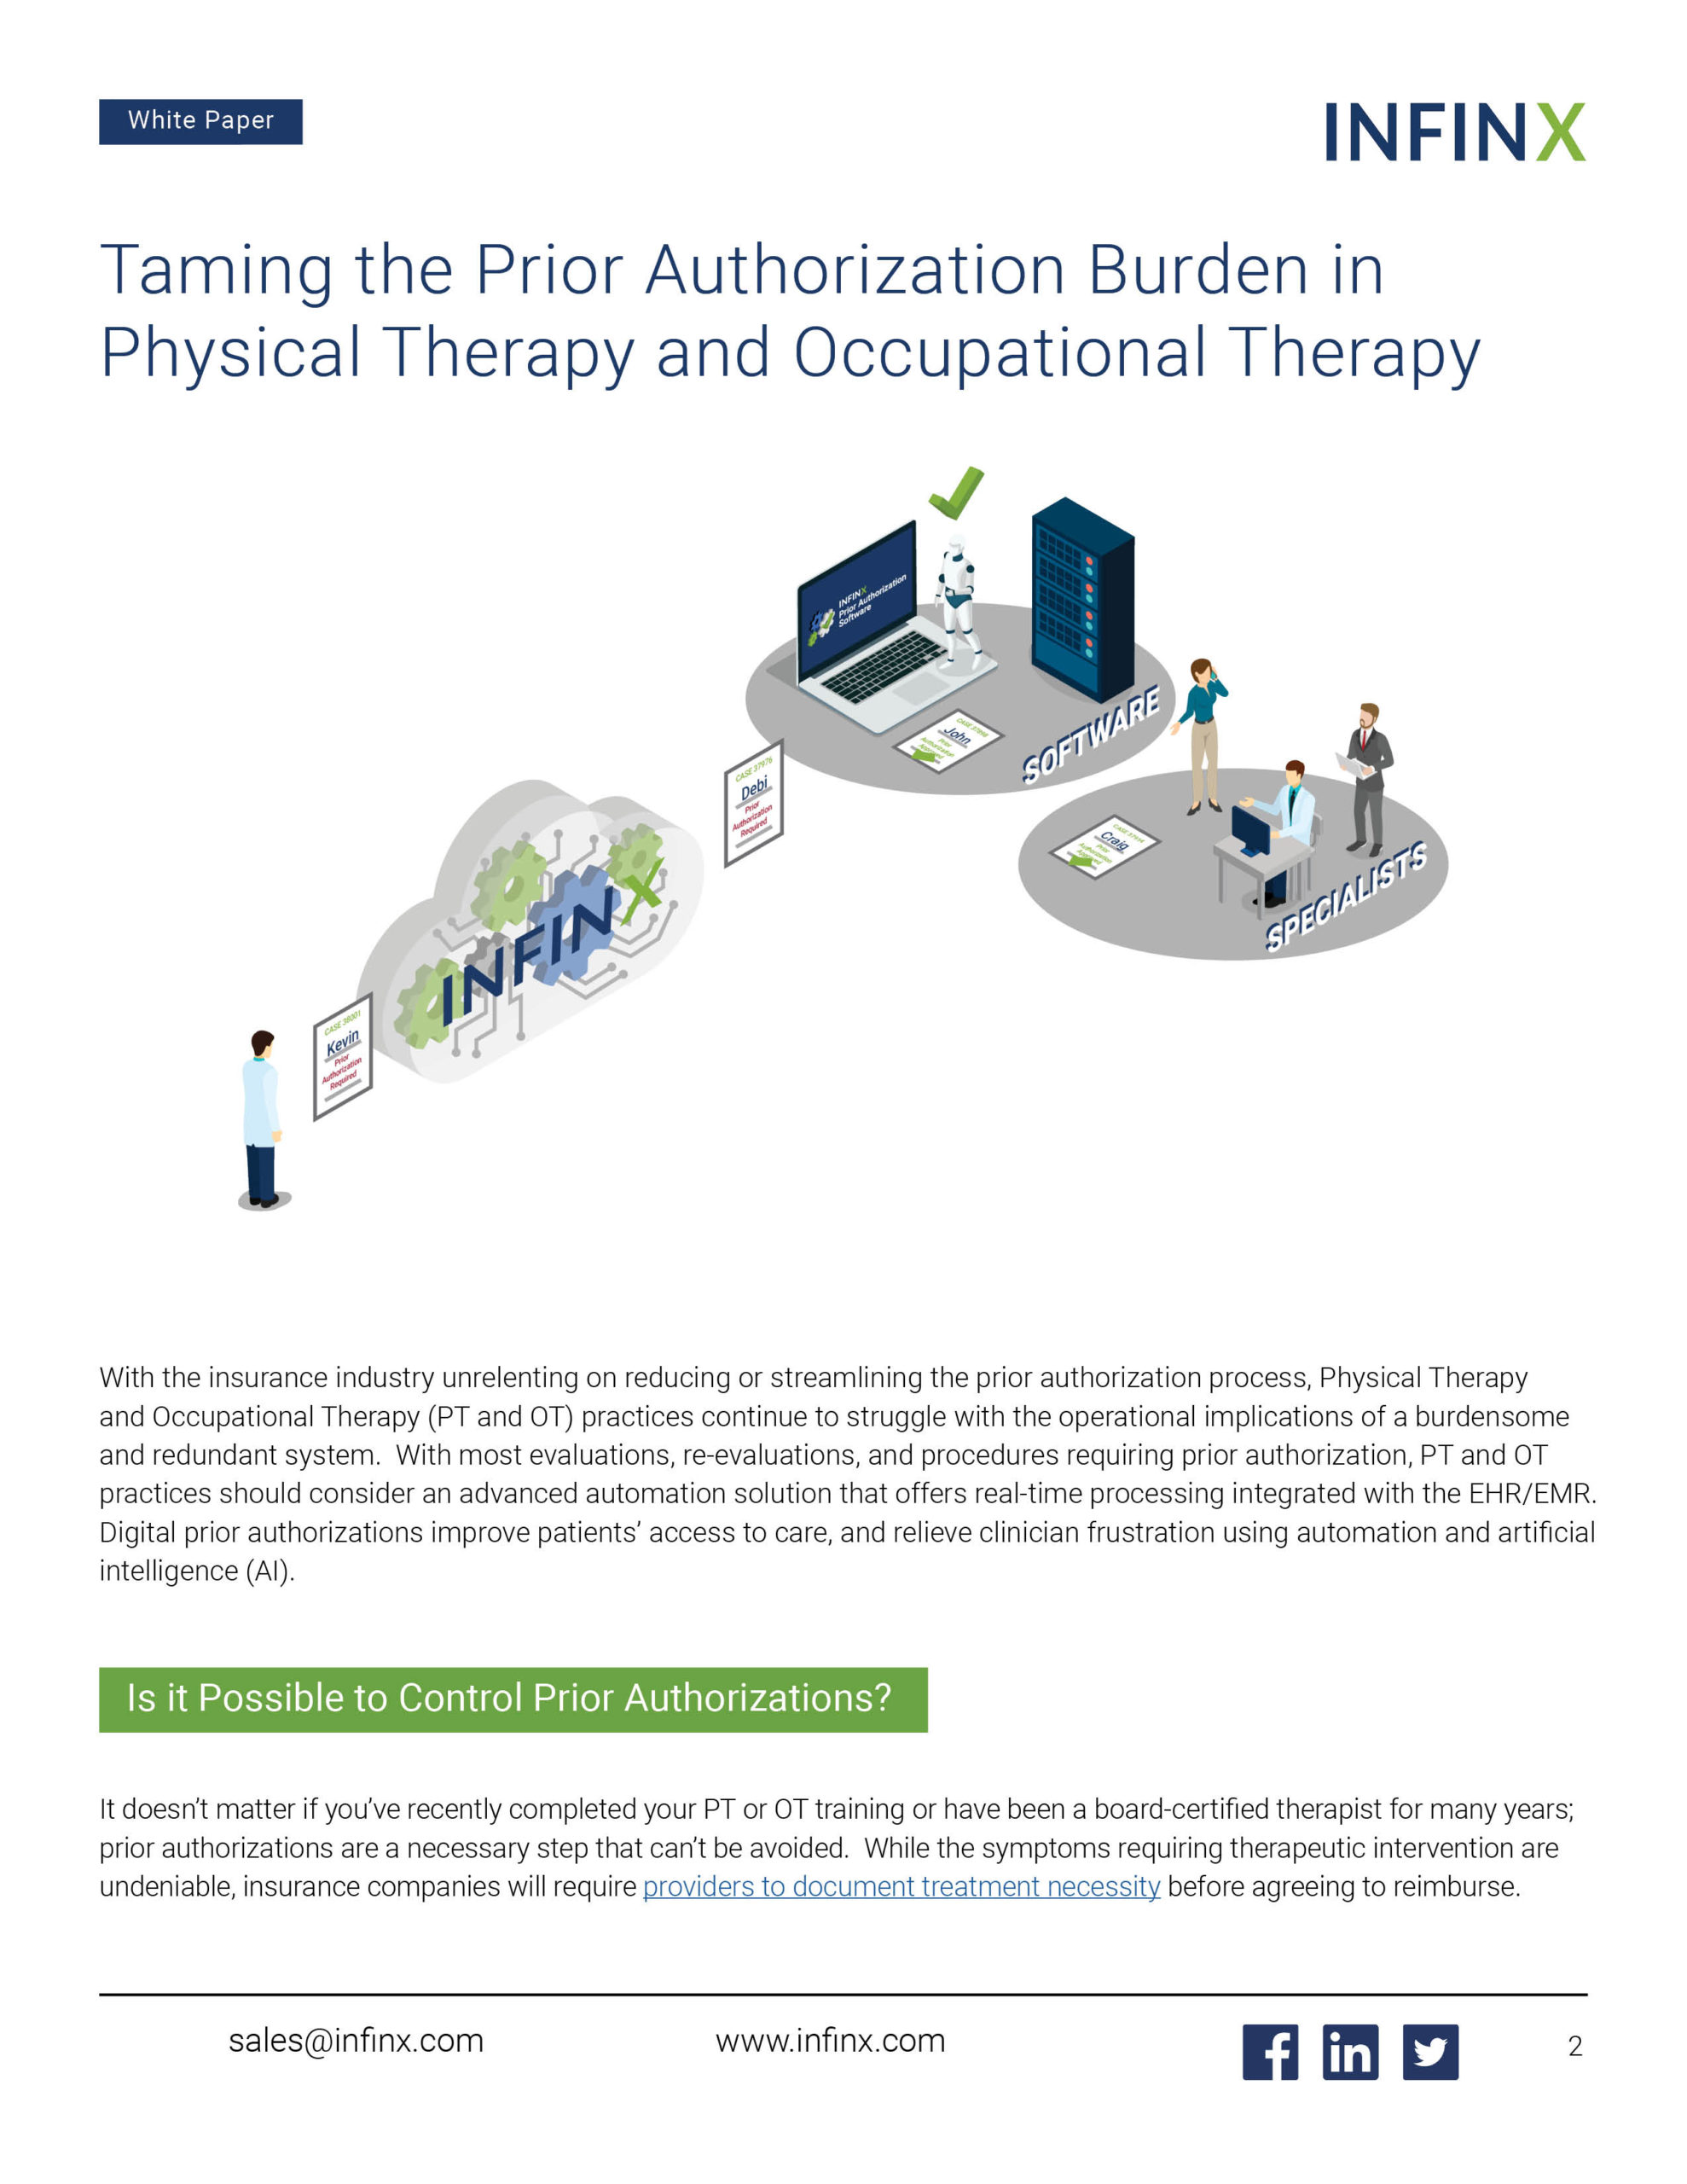 Infinx - White Paper - Taming the Prior Authorization Burden in Physical Therapy and Occupational Therapy June2021 2